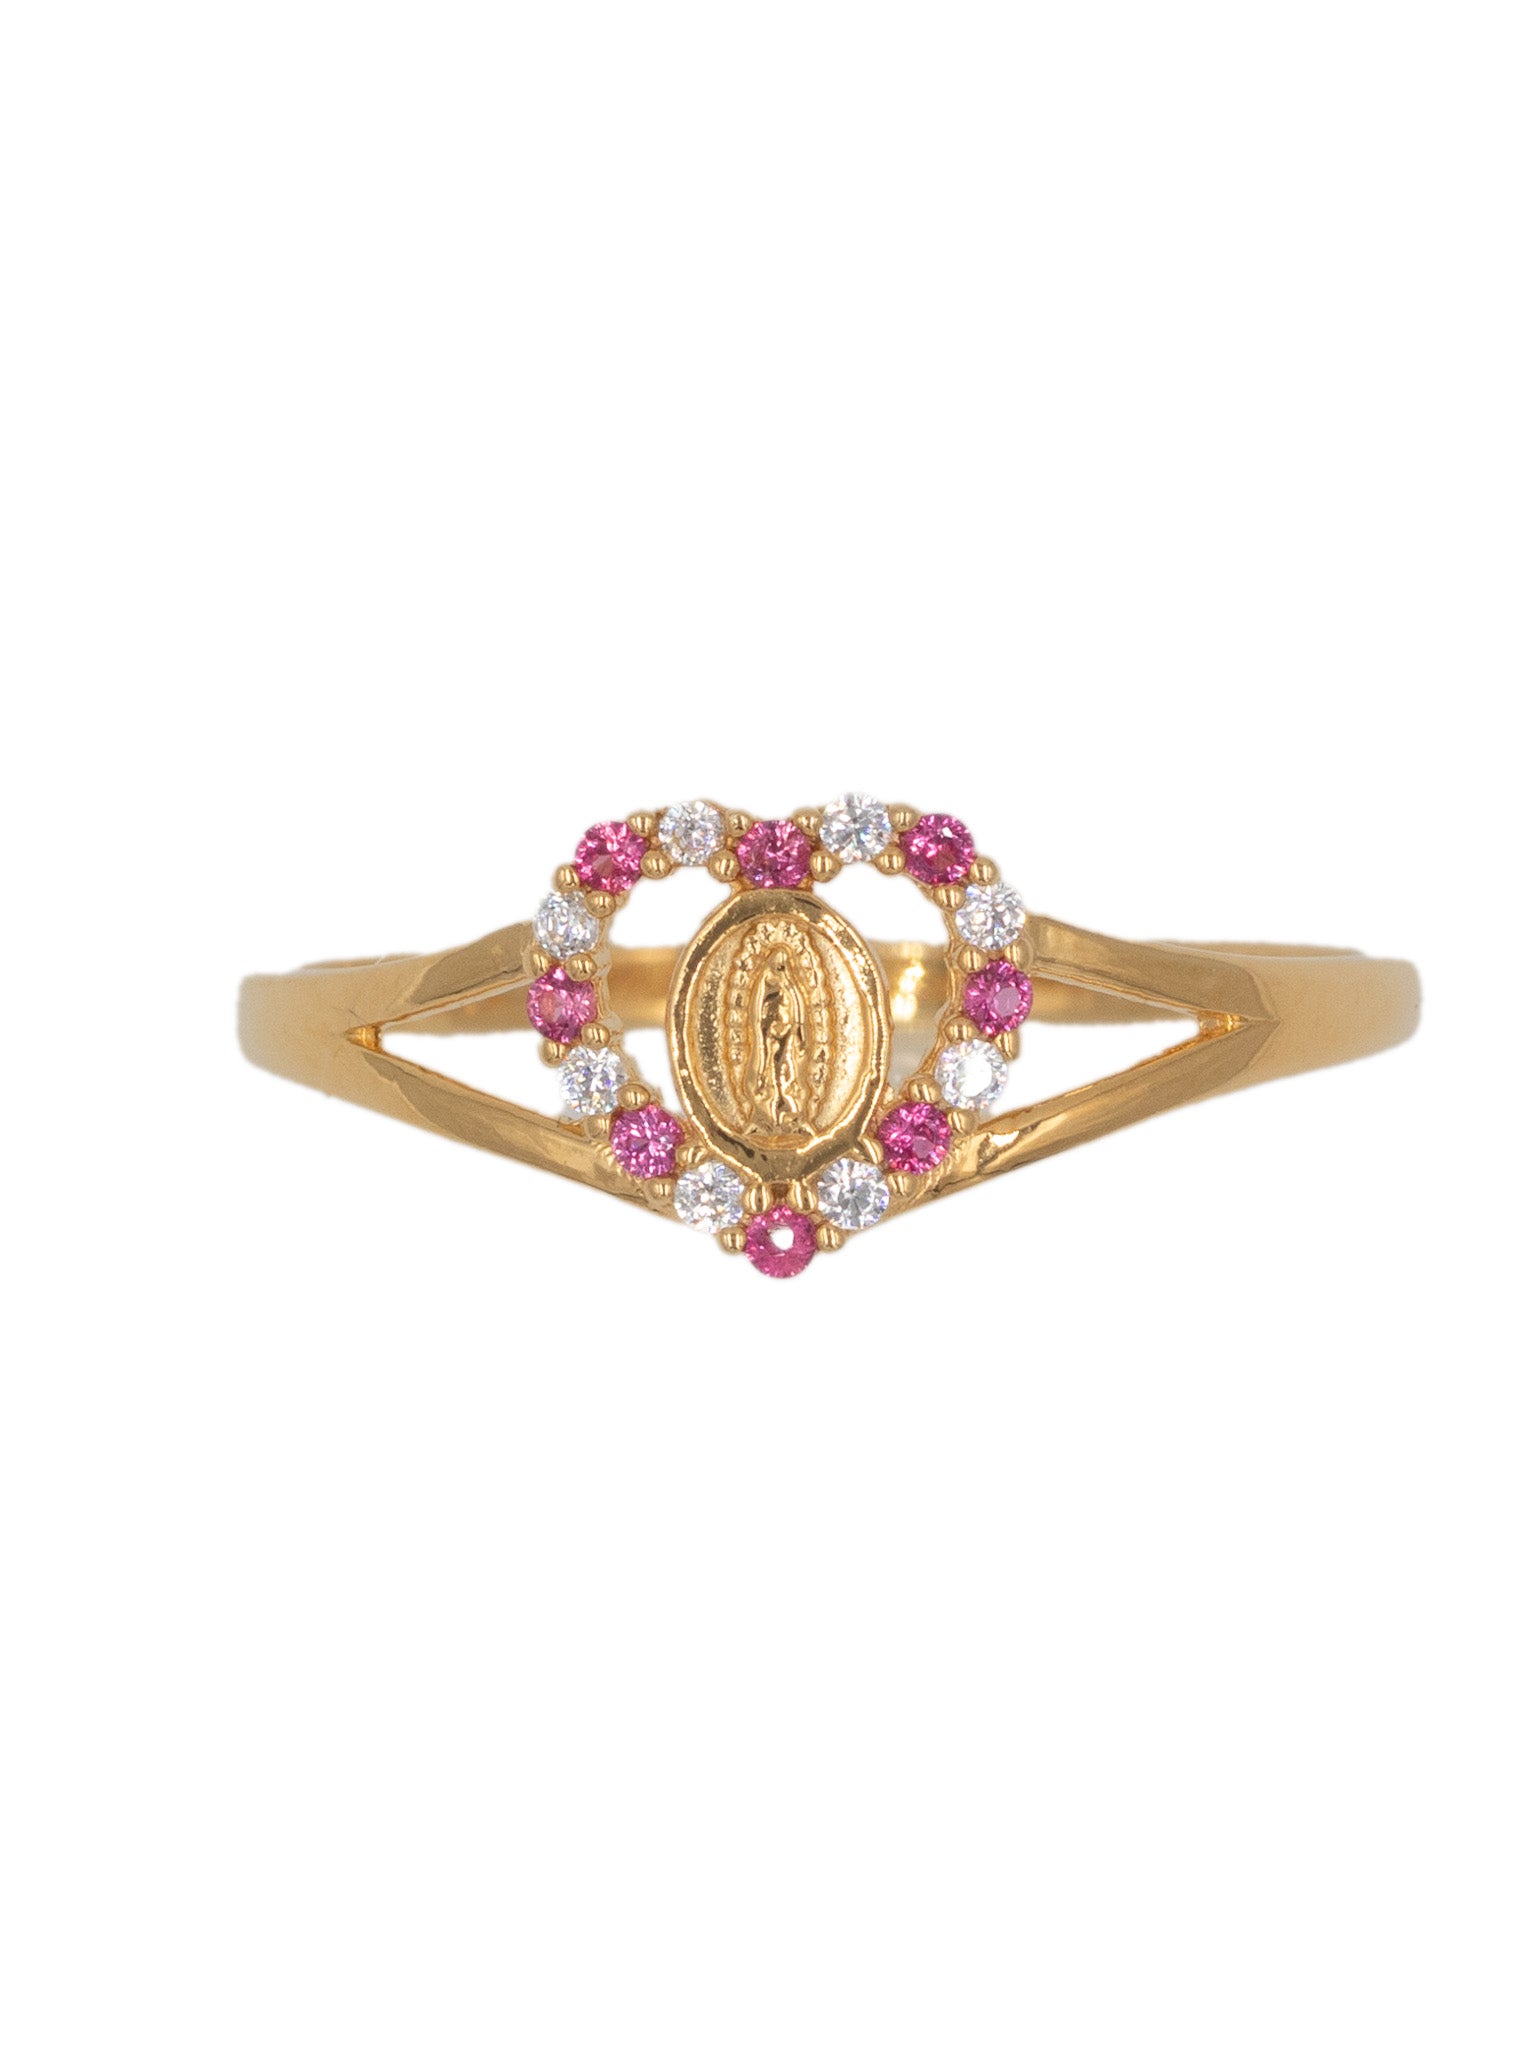 Pink and White Virgin Mary Ring